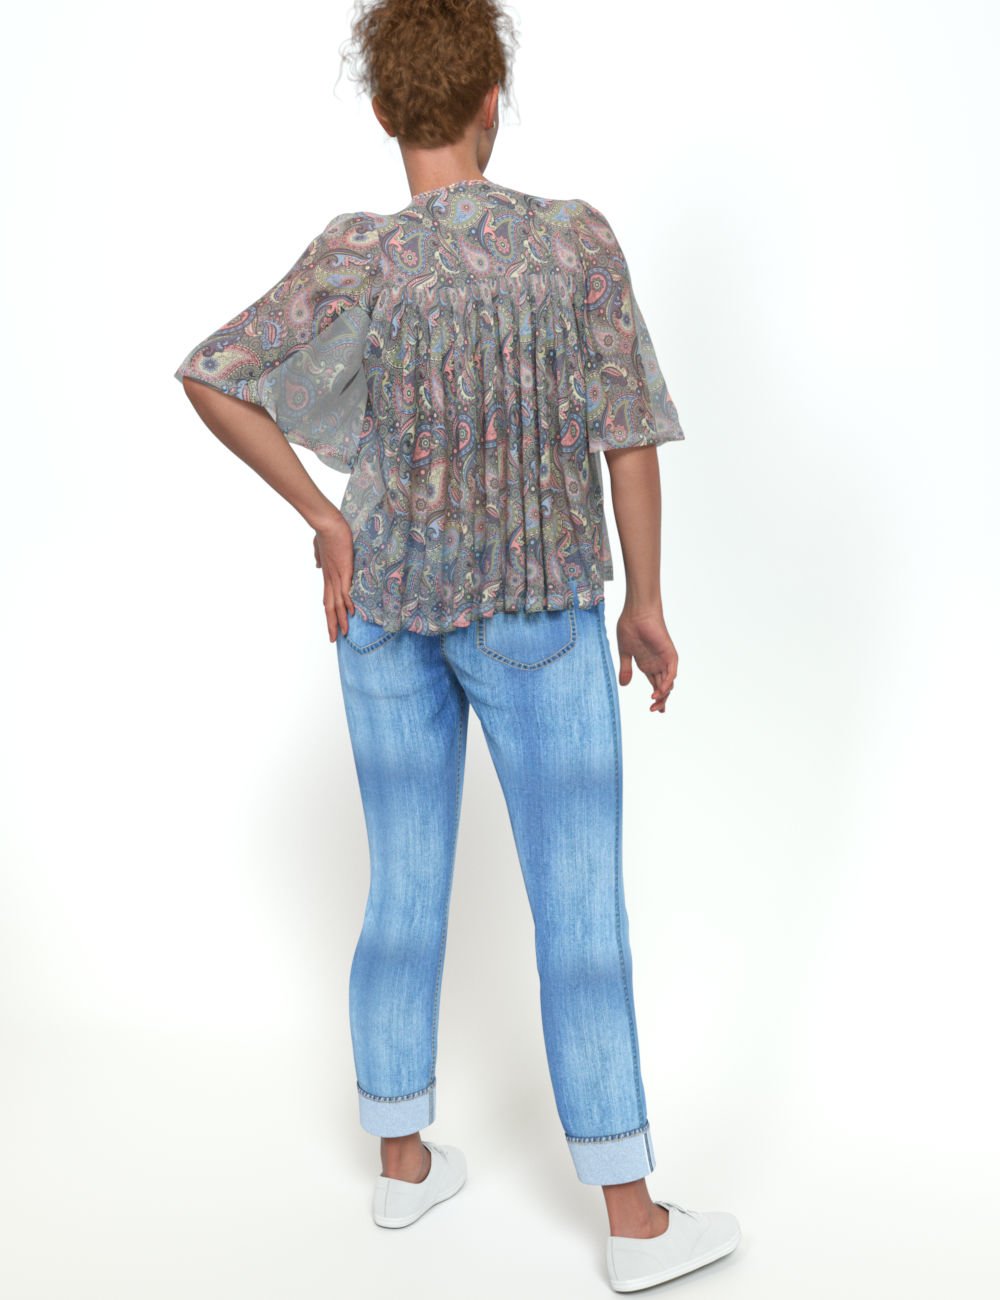 dForce Angie Cuffed Jeans Outfit for Genesis 9 by: WildDesigns, 3D Models by Daz 3D